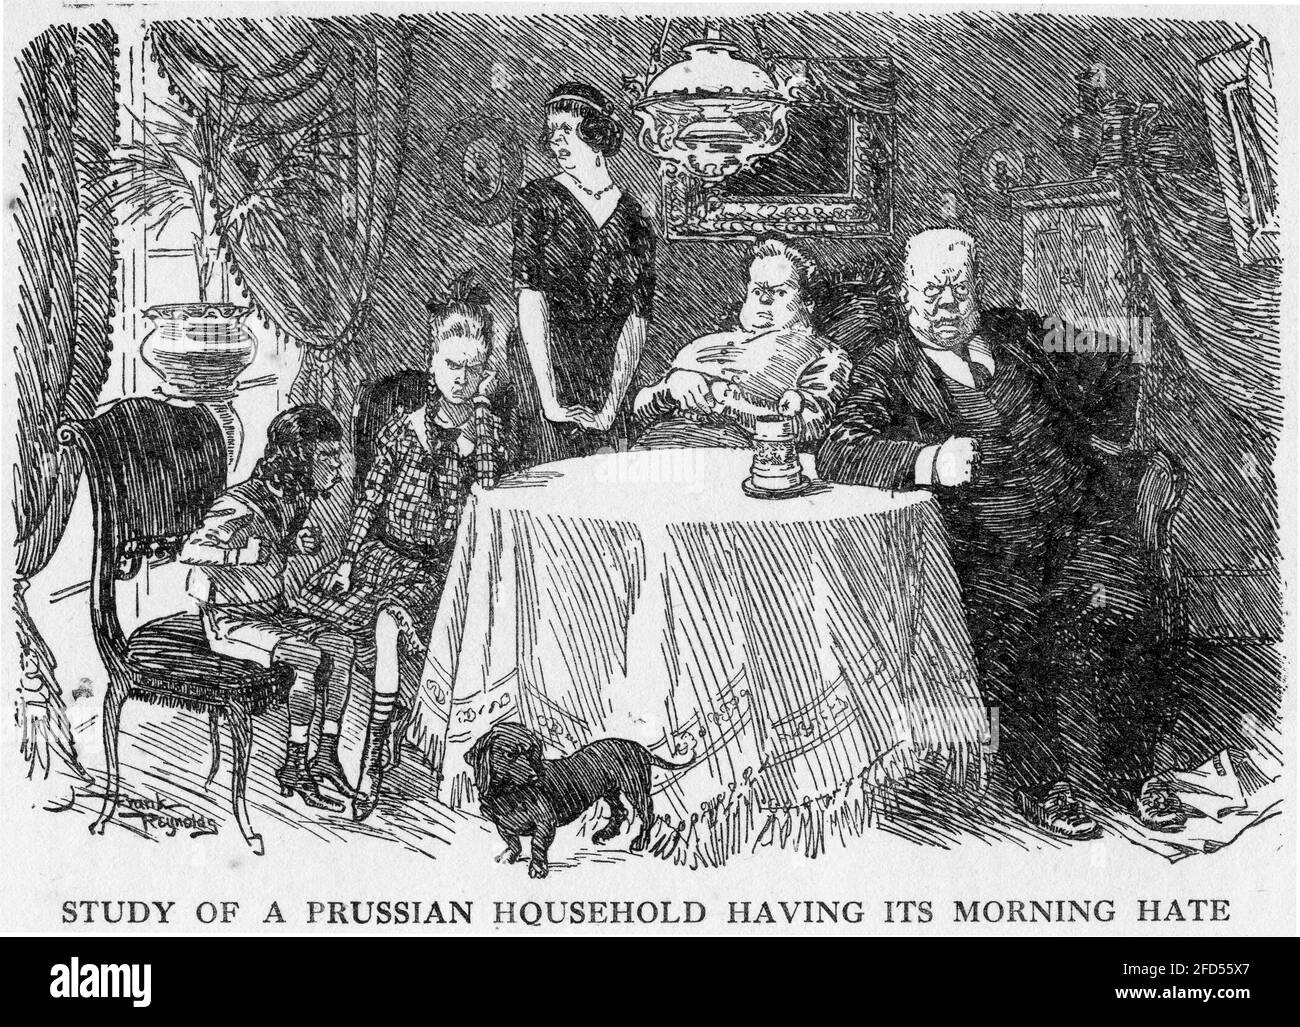 Engraving of A Prussian household having its morning hate, mocking the German attitude to World War One From Punch magazine. Stock Photo